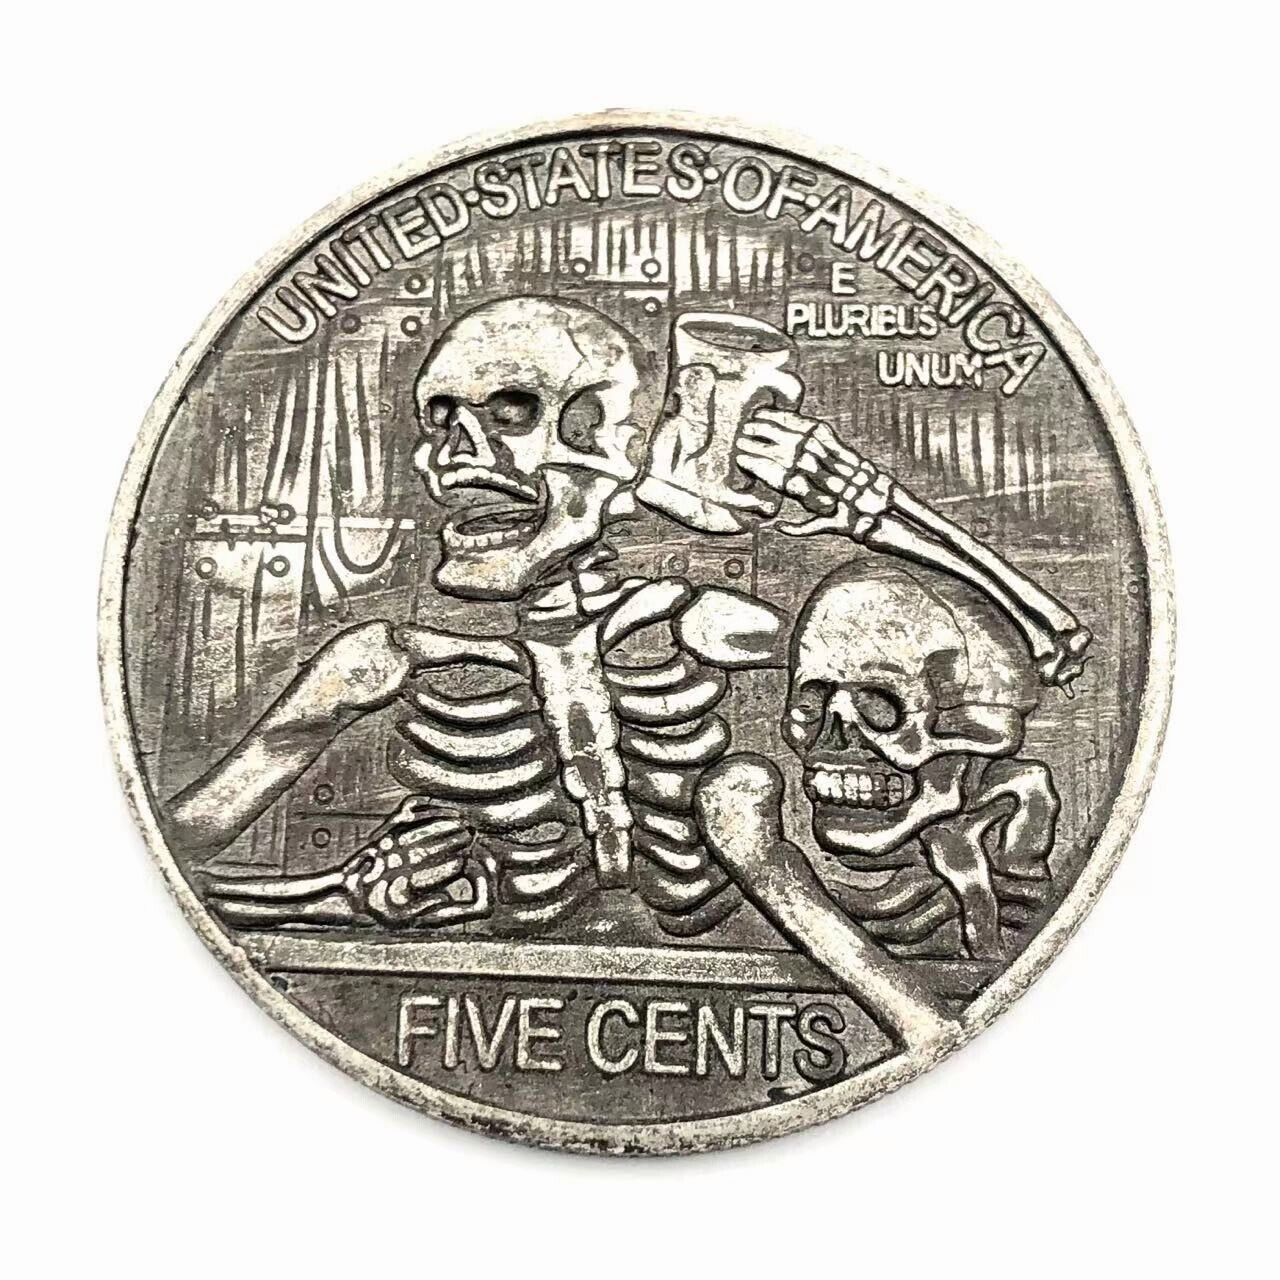 Us Drinking Beer Skull Five Cents Hobo Nickels Souvenir Collection Coin G1